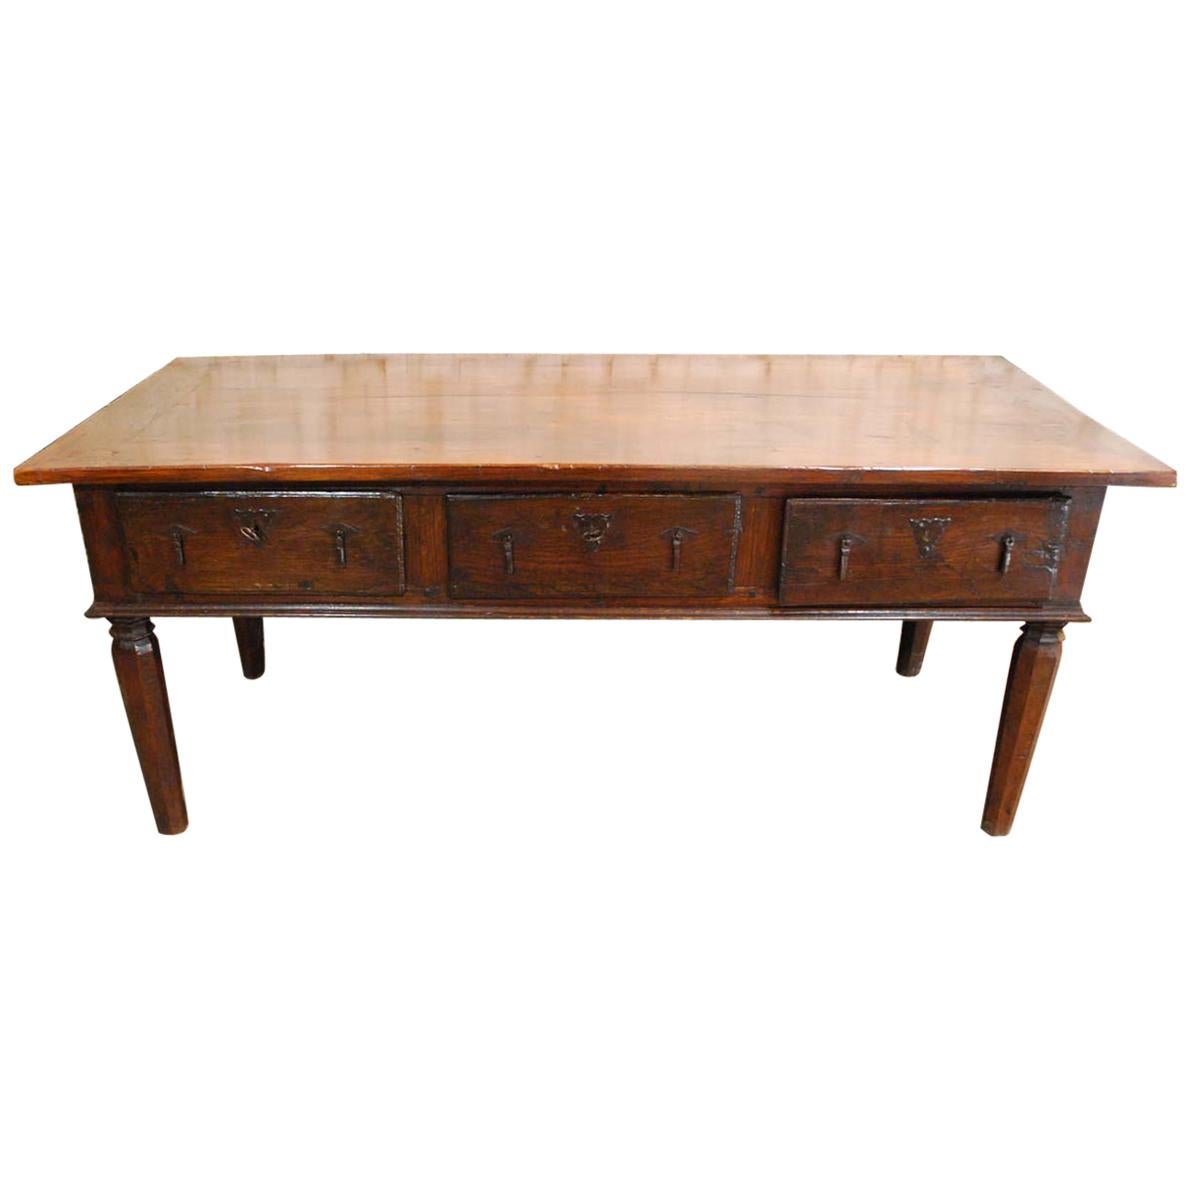 Antique 19th Century Spanish Chestnut Console or Serving Table